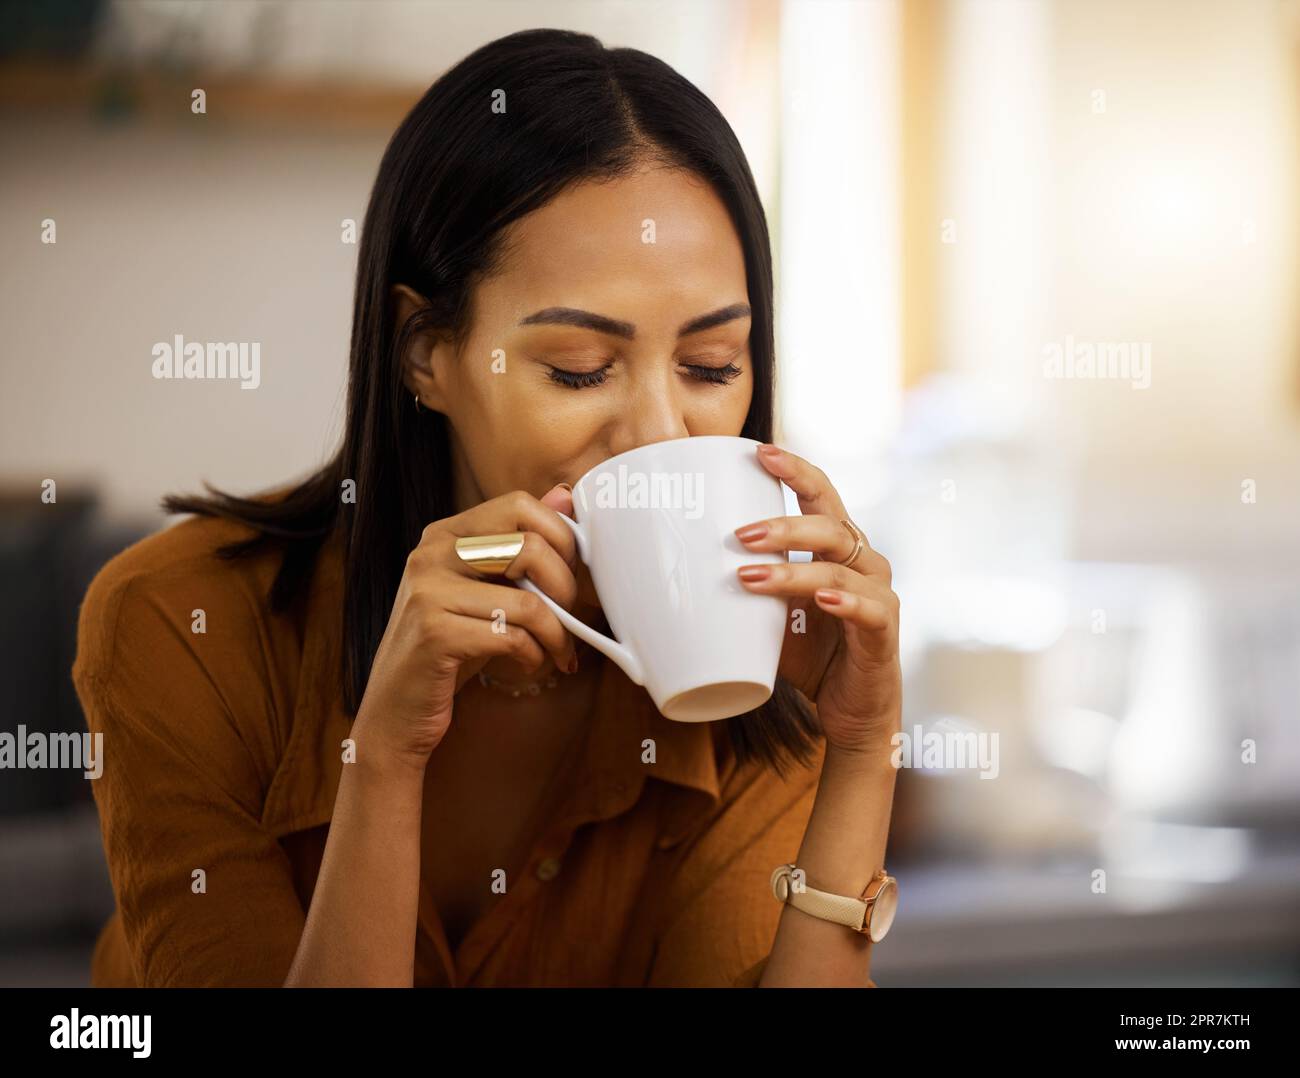 Young happy beautiful mixed race woman enjoying a cup of coffee alone at home. Hispanic female in her 20s drinking a cup of tea in the kitchen at home Stock Photo